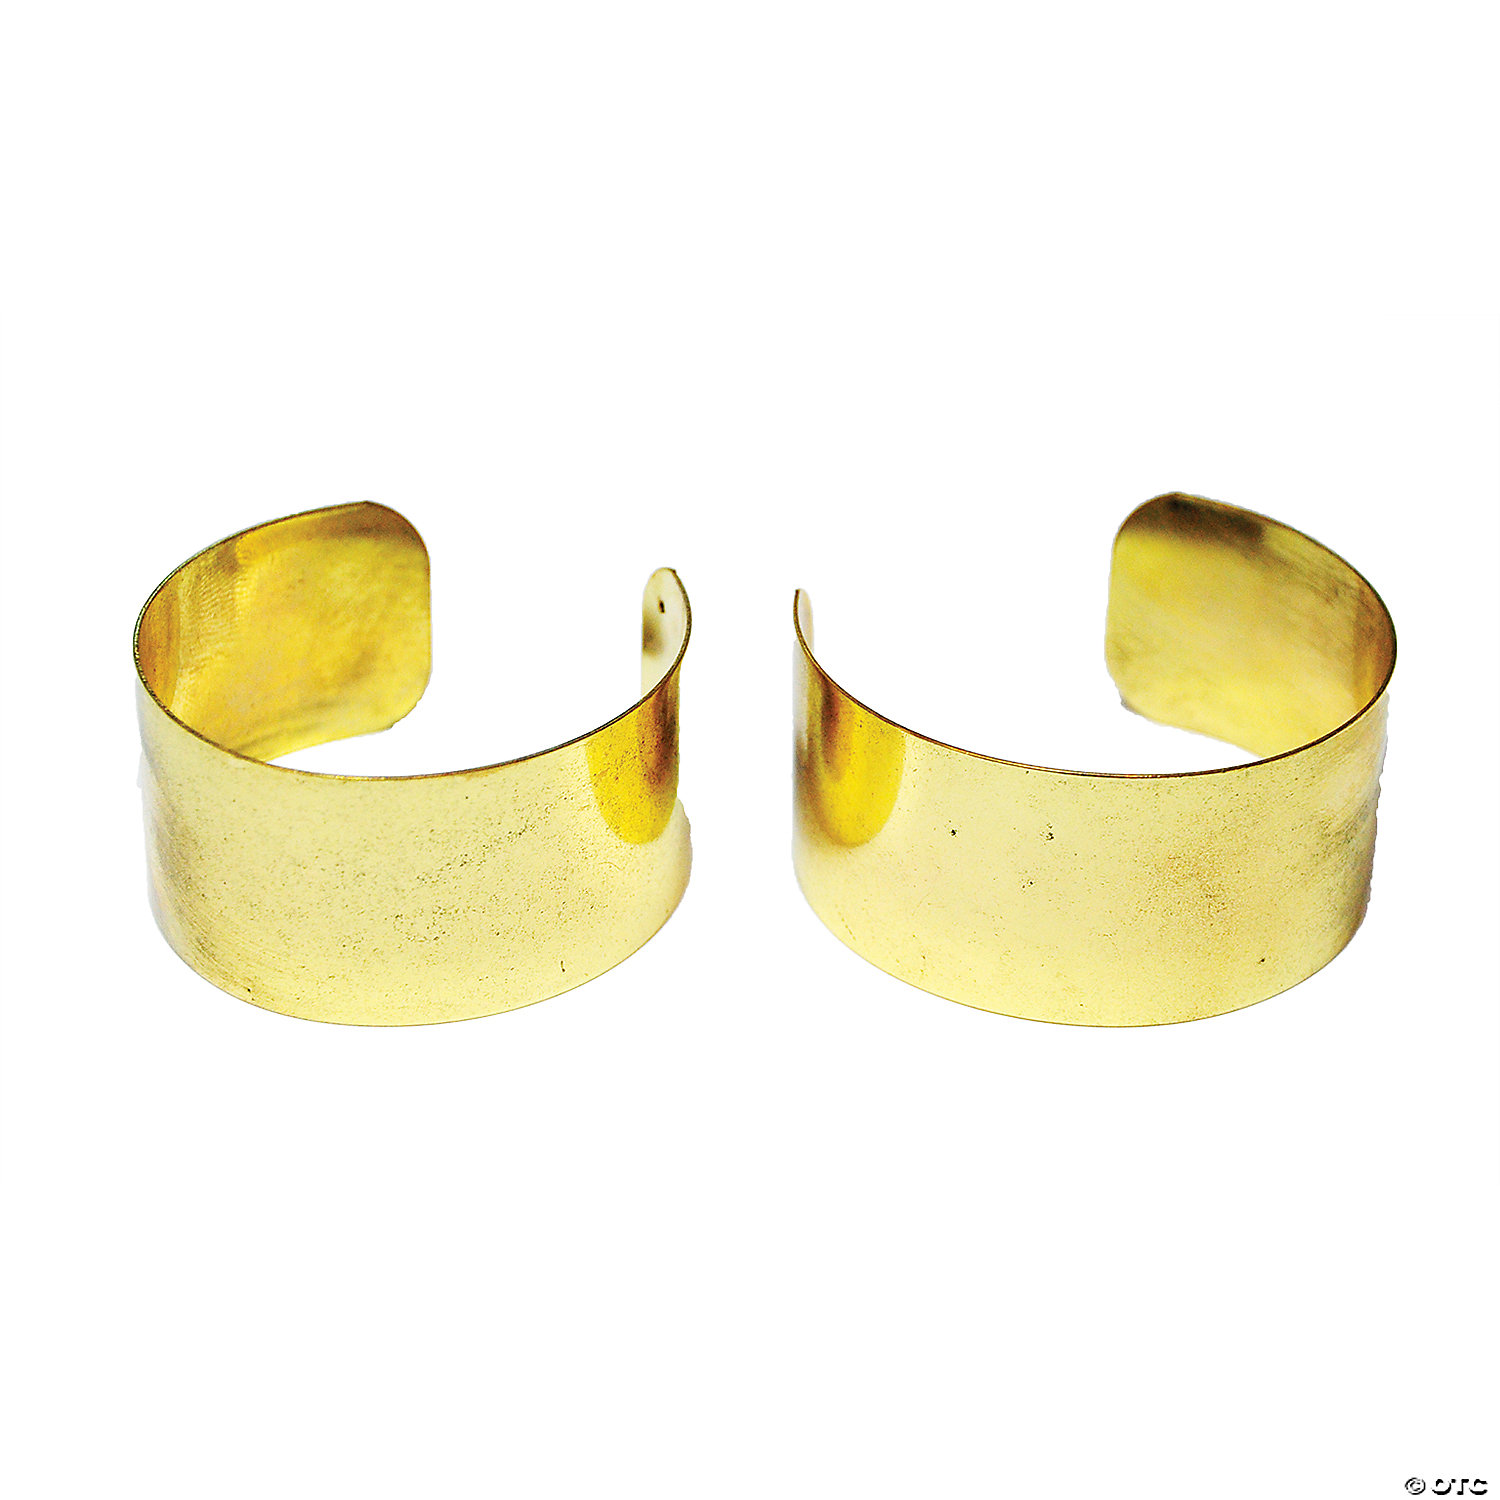 Girls Out Loud Morris Costumes Gold Arm Cuffs Pair